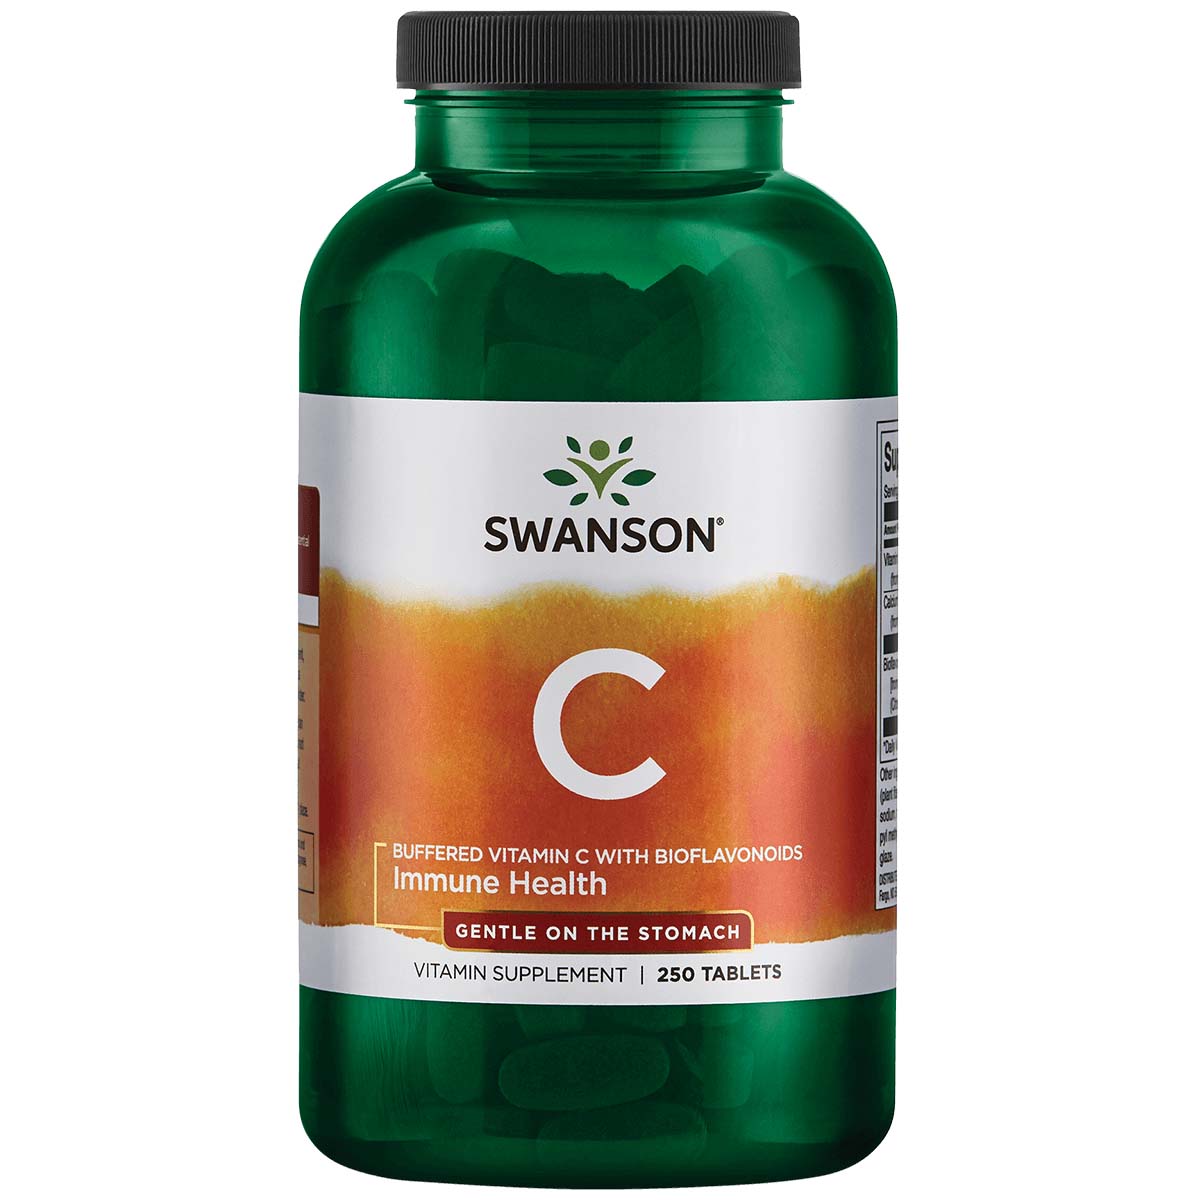 Swanson Buffered Vitamin C with Bioflavonoids 250 Tablets 1000 mg